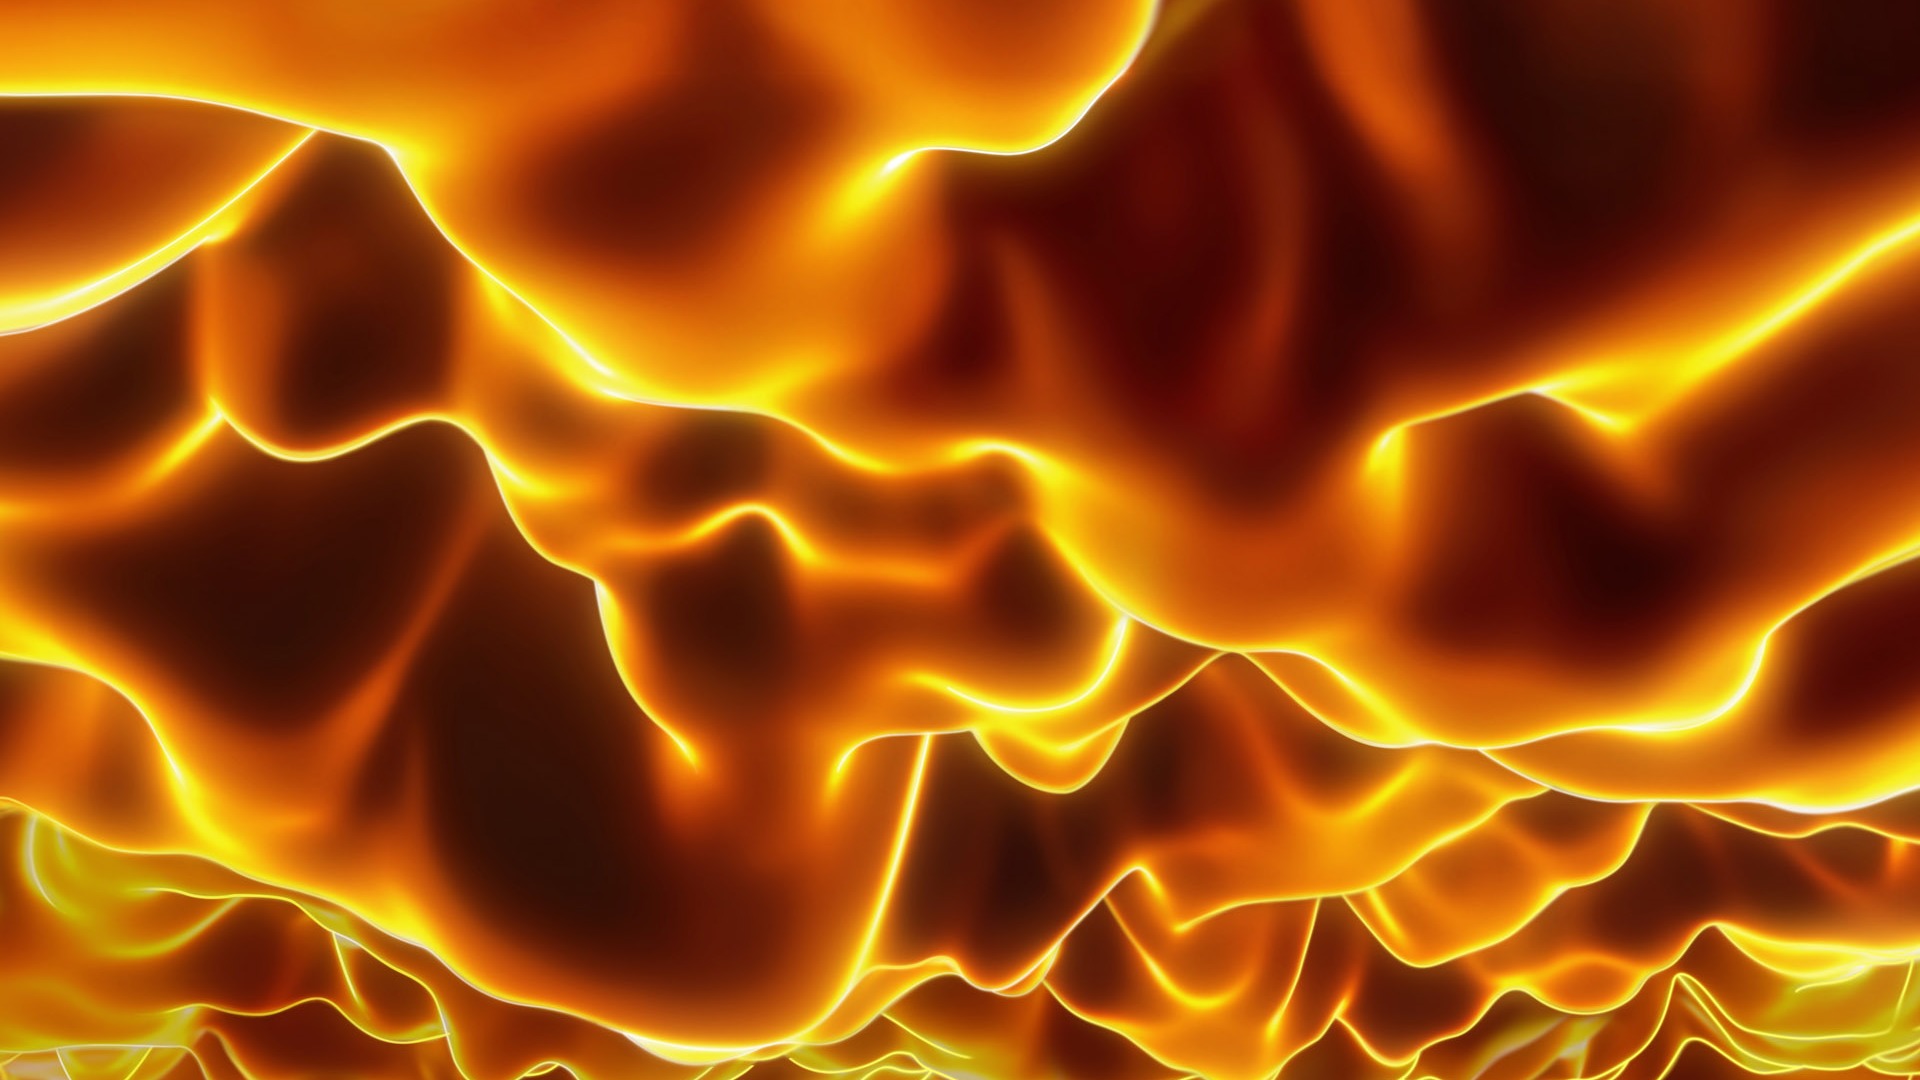 Flame Feature HD Wallpaper #4 - 1920x1080